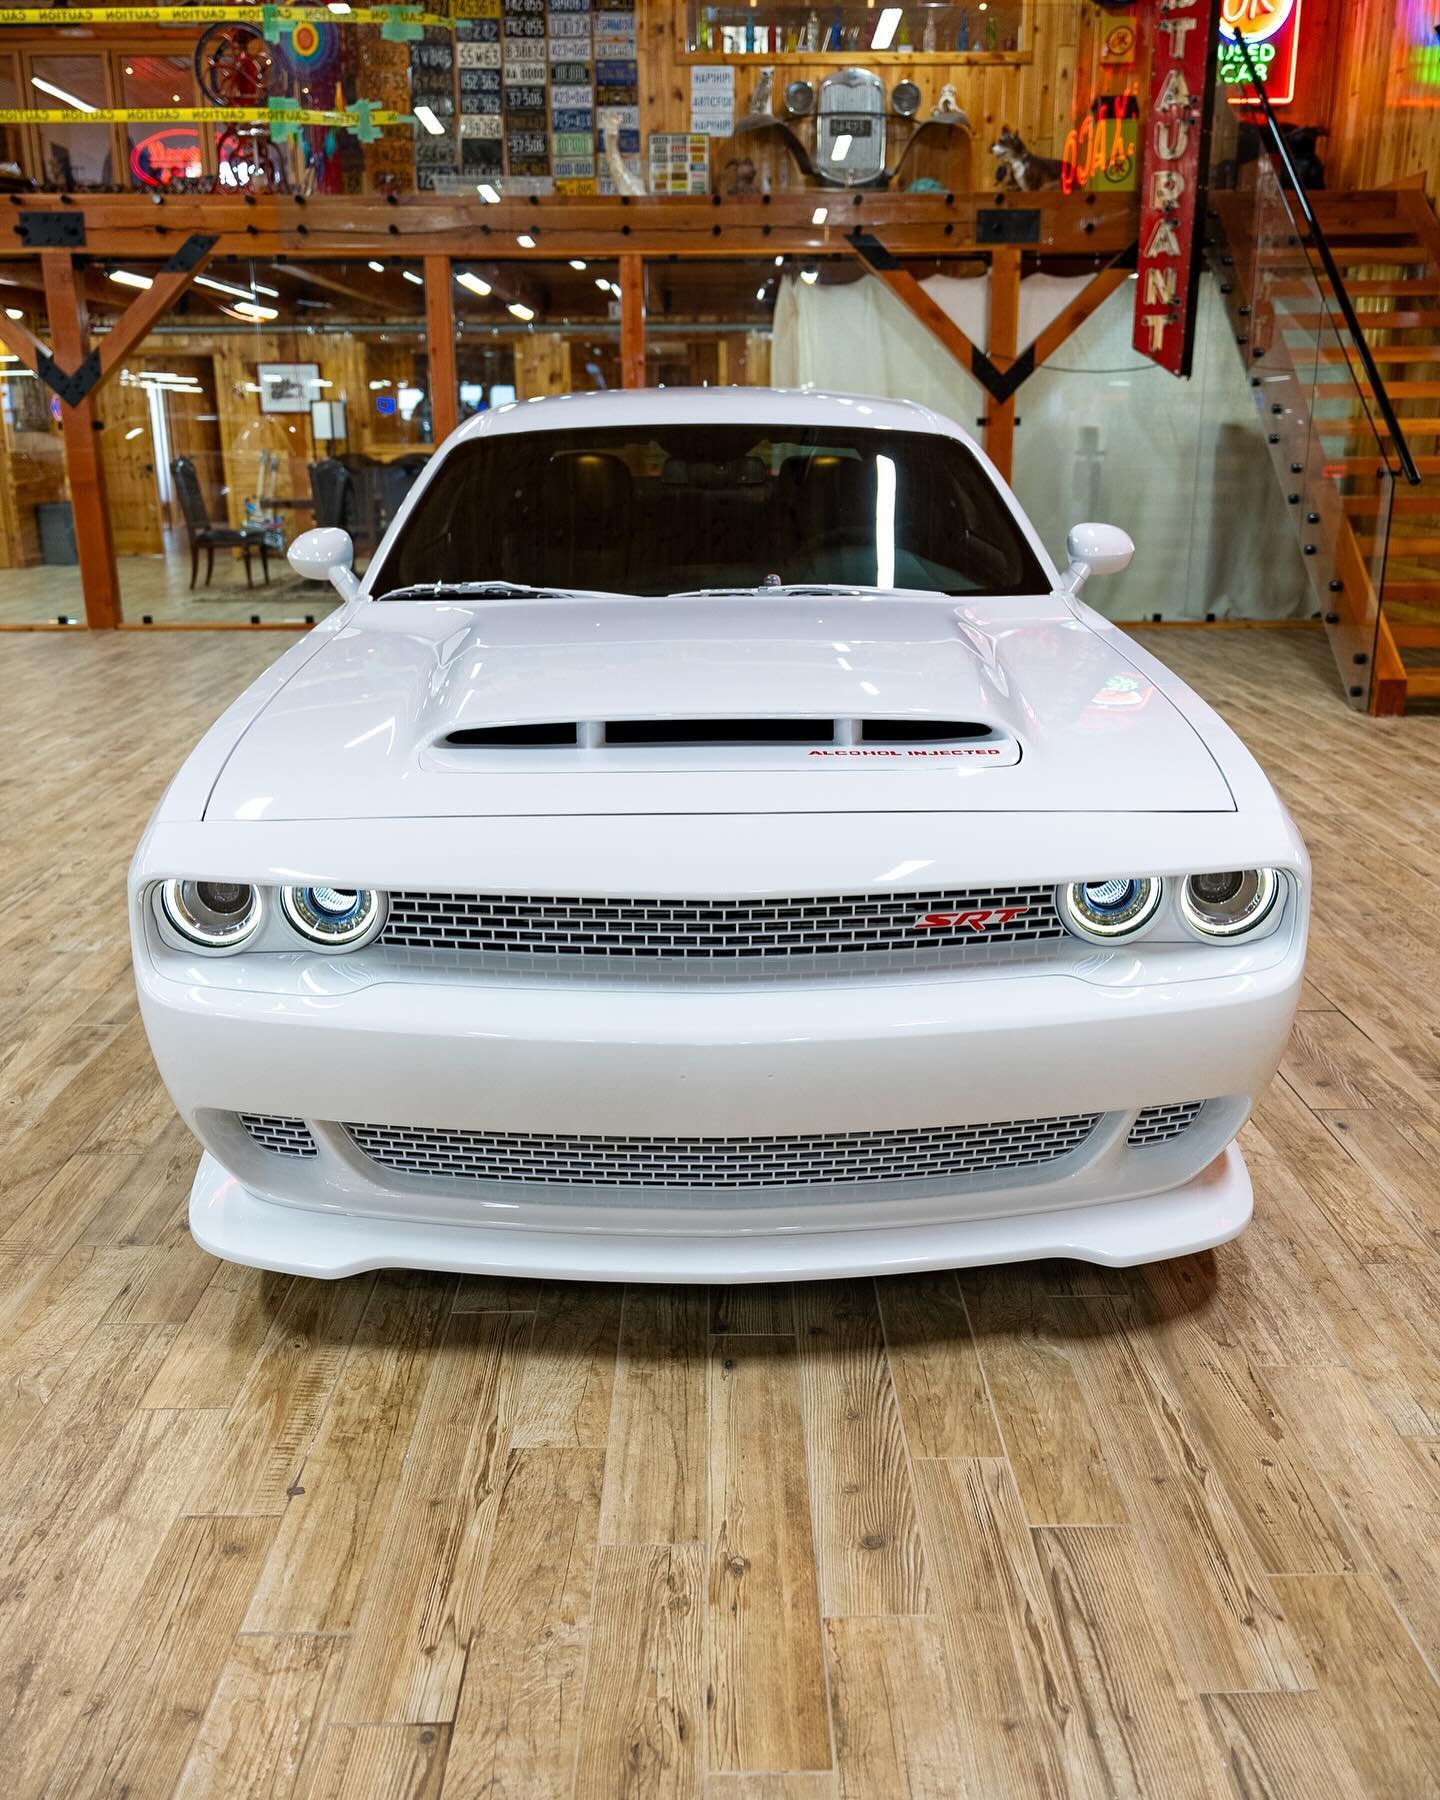 The long awaited Triple White Series is now complete 🔥 This Dodge Demon 170 now boasts the all-white spec along with the Charger Hellcat &amp; other Dodge Demon (check out our reels for the last two). All plastic pieces, windshield wipers, rims, cal